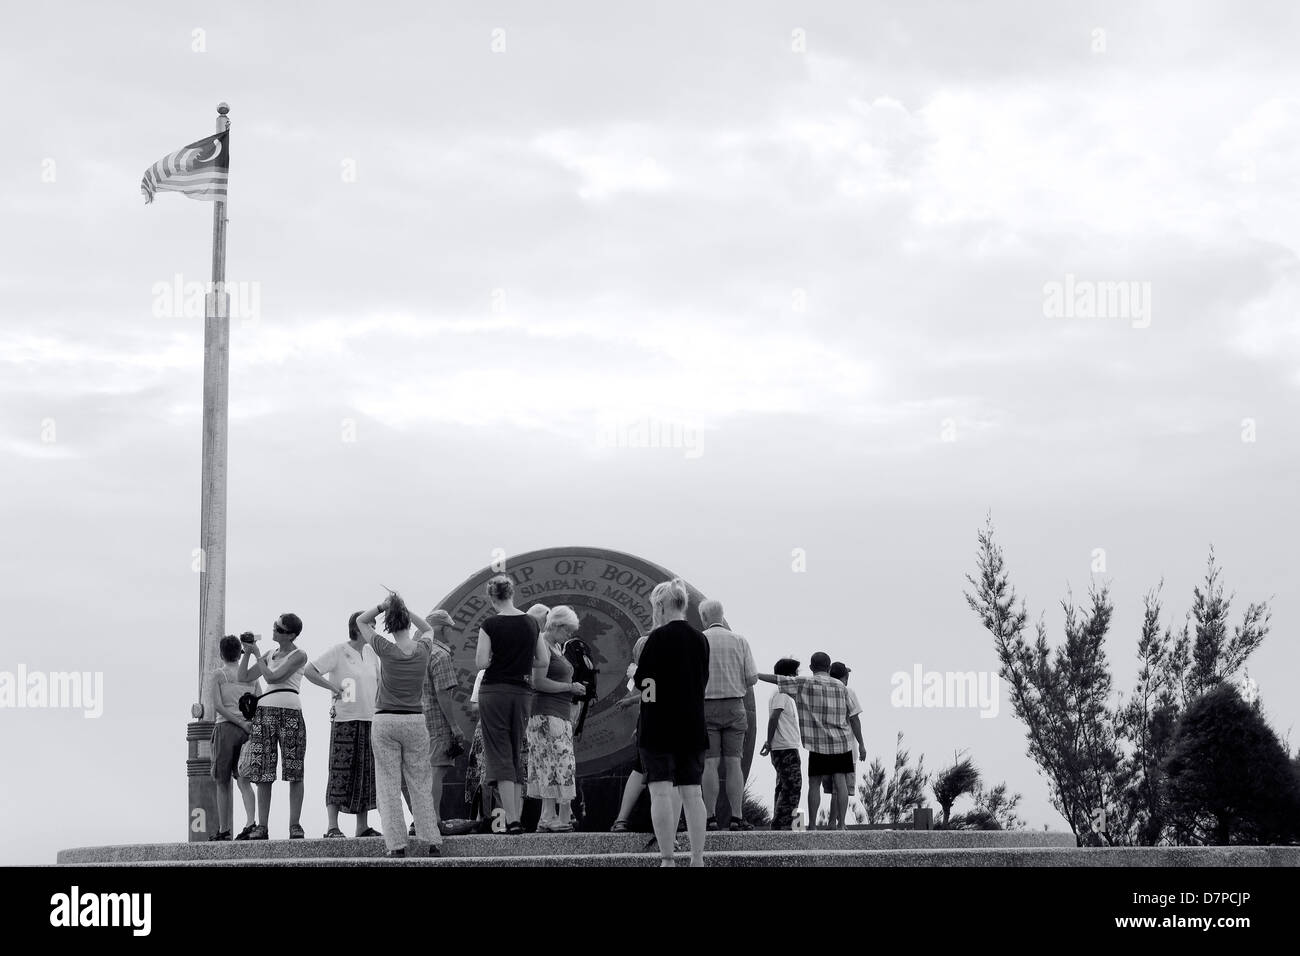 SABAH STATE, EAST MALAYSIA OCTOBER 1 2009: A group of tourists snap photos of the Globe Statue at the Tip of Borneo island. Stock Photo